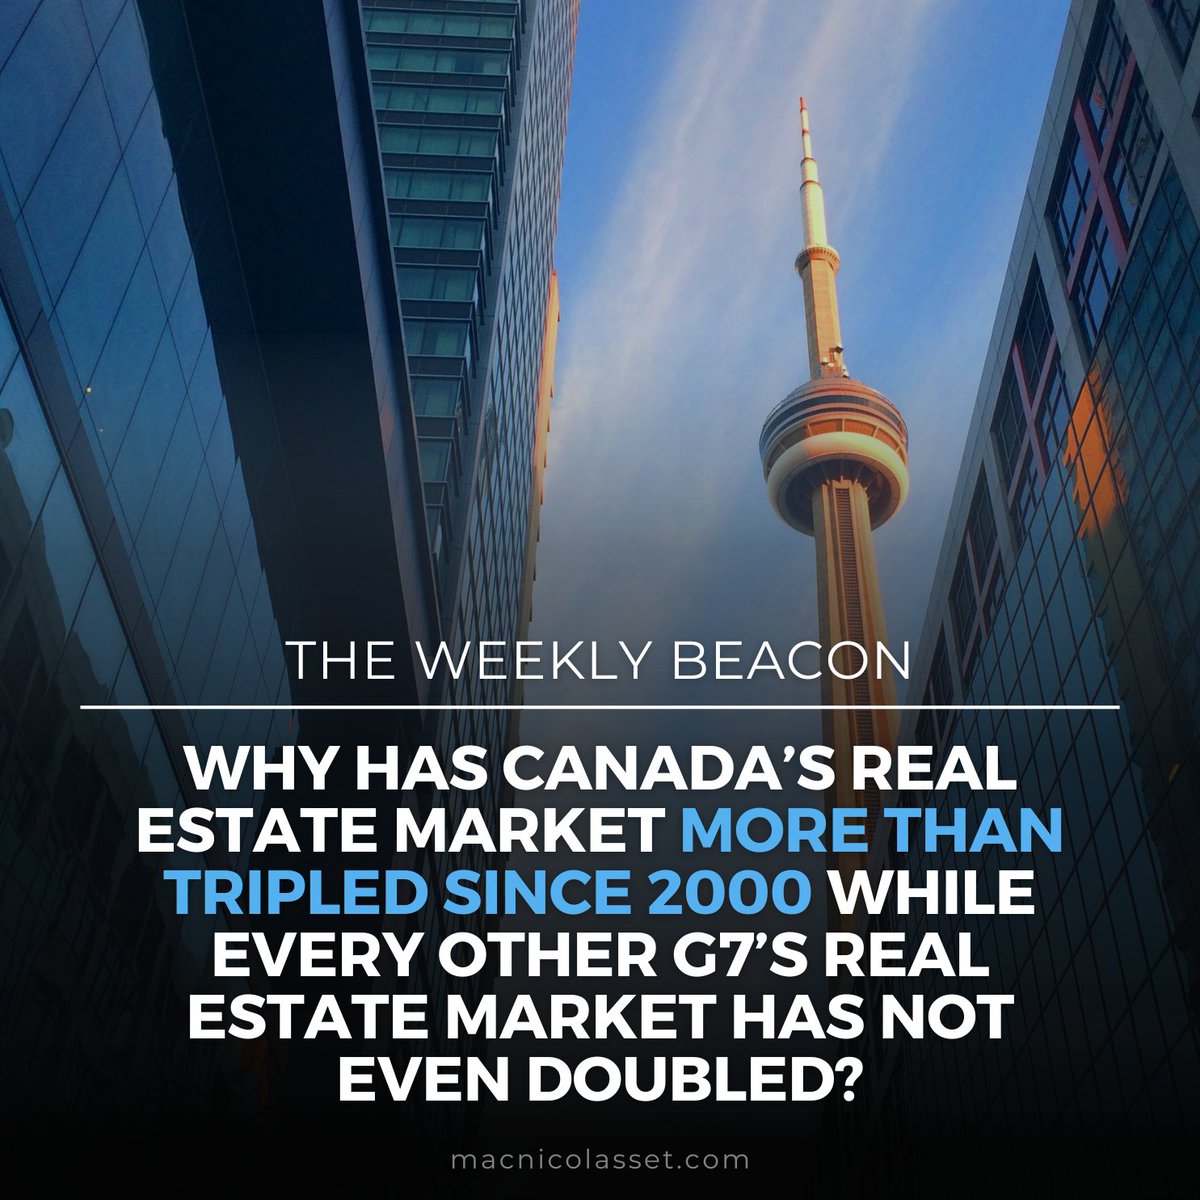 Over the last 12-15 years, Canada’s real estate market has ballooned in comparison to the rest of the G7.

We shared our commentary about this in the latest edition of #TheWeeklyBeacon
macnicolasset.com/the-weekly-bea…

#Canada #realestatecanada #realestatemarket #G7